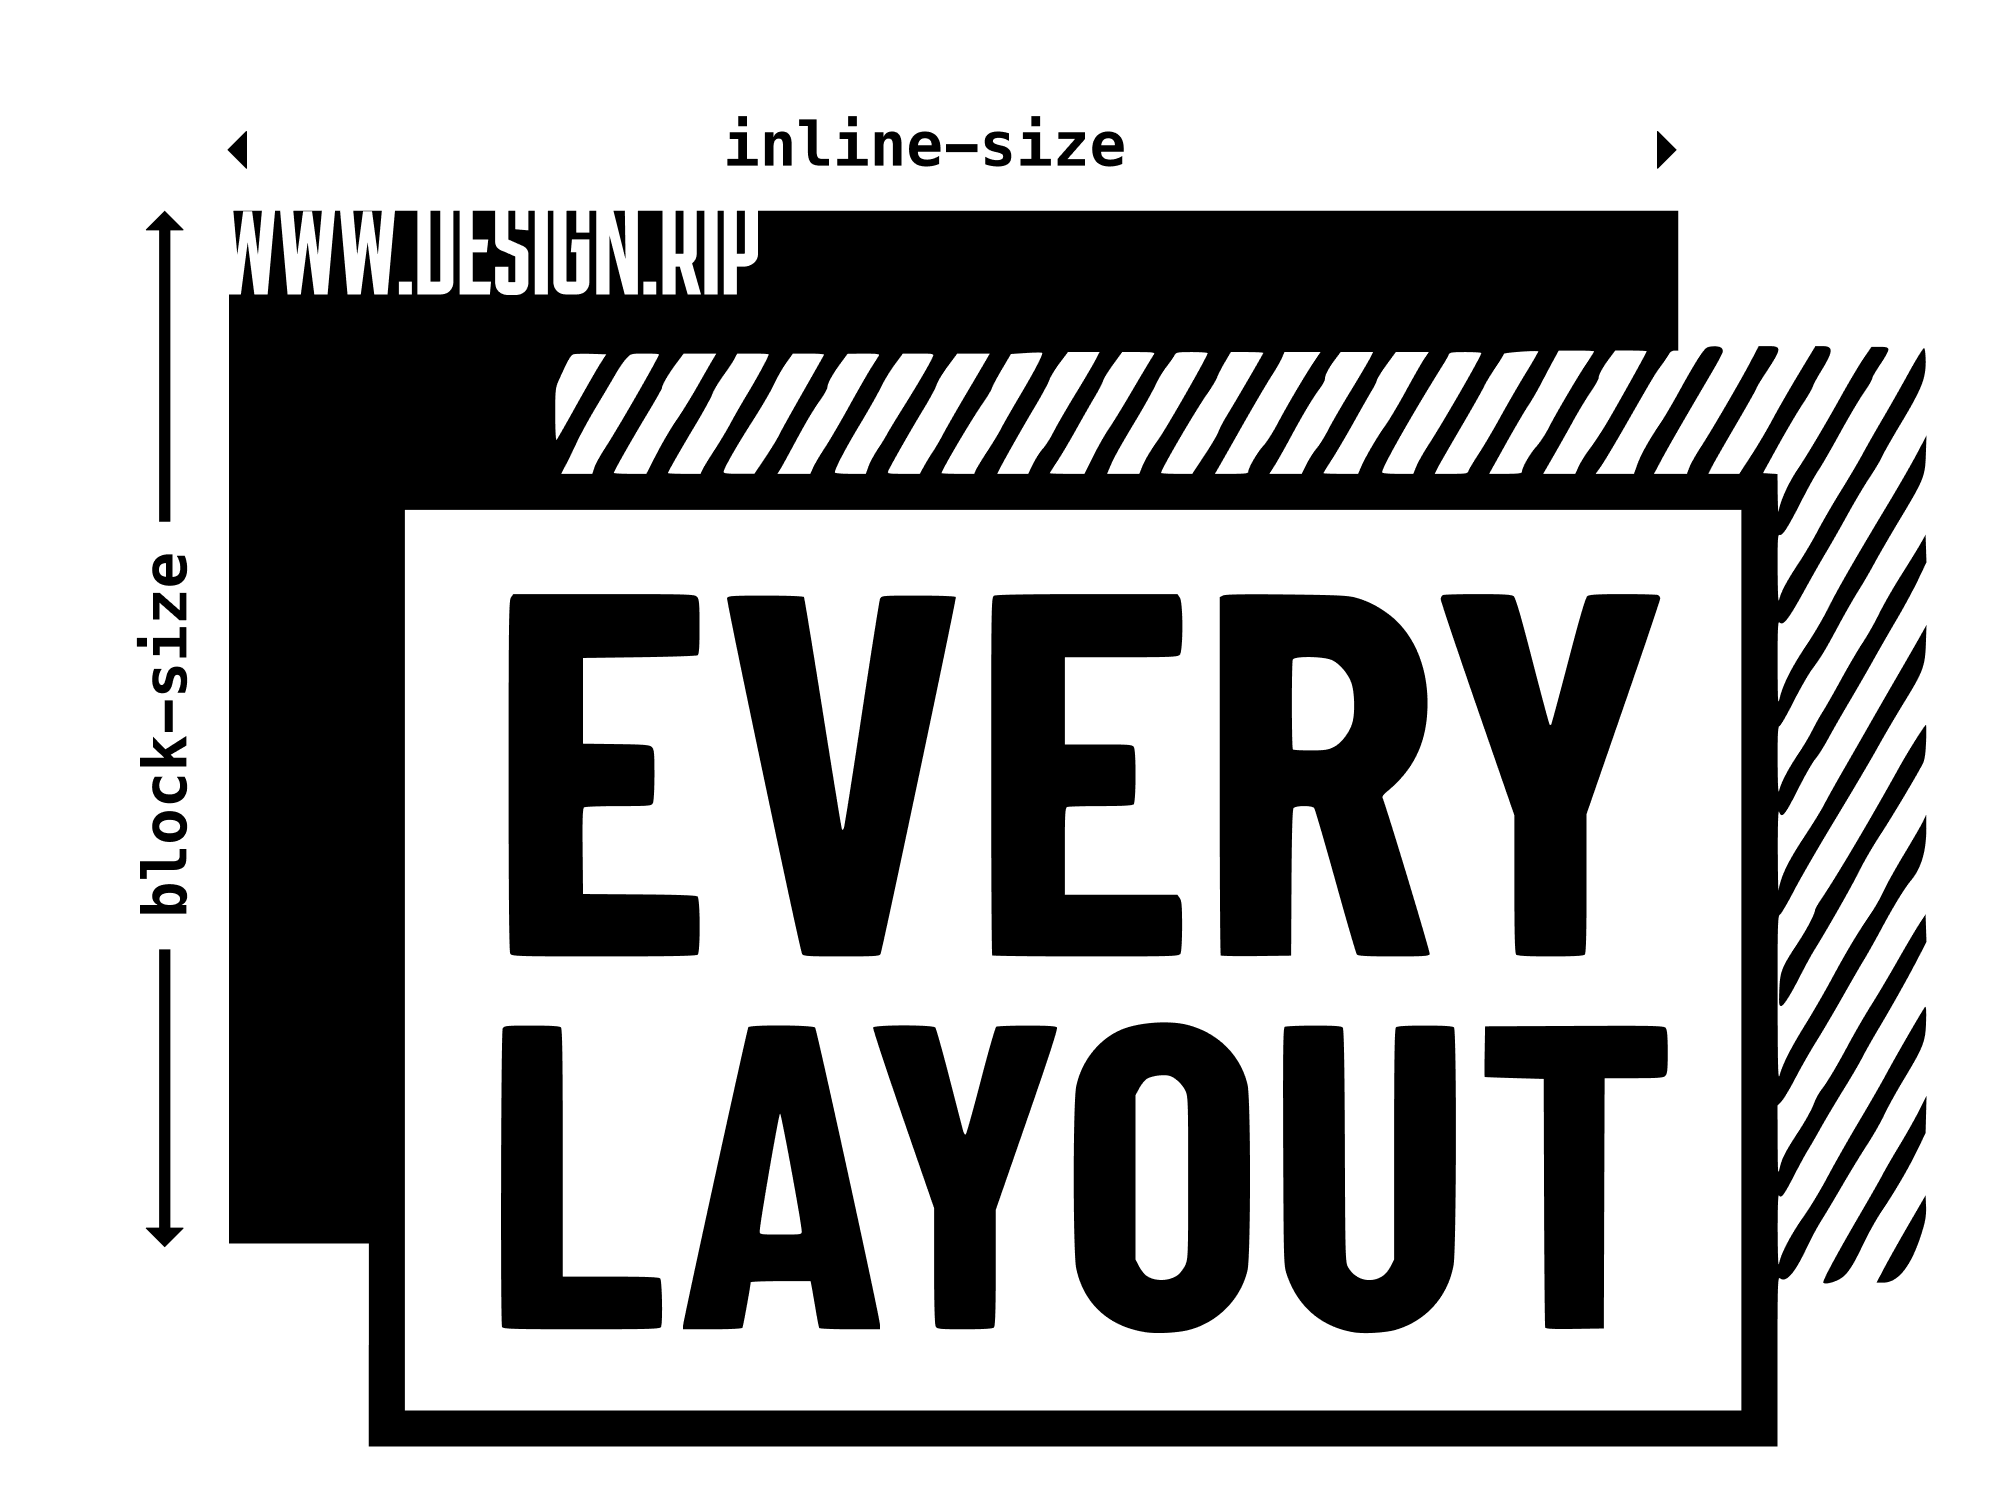 [VIP] Every Layout: Relearn CSS layout